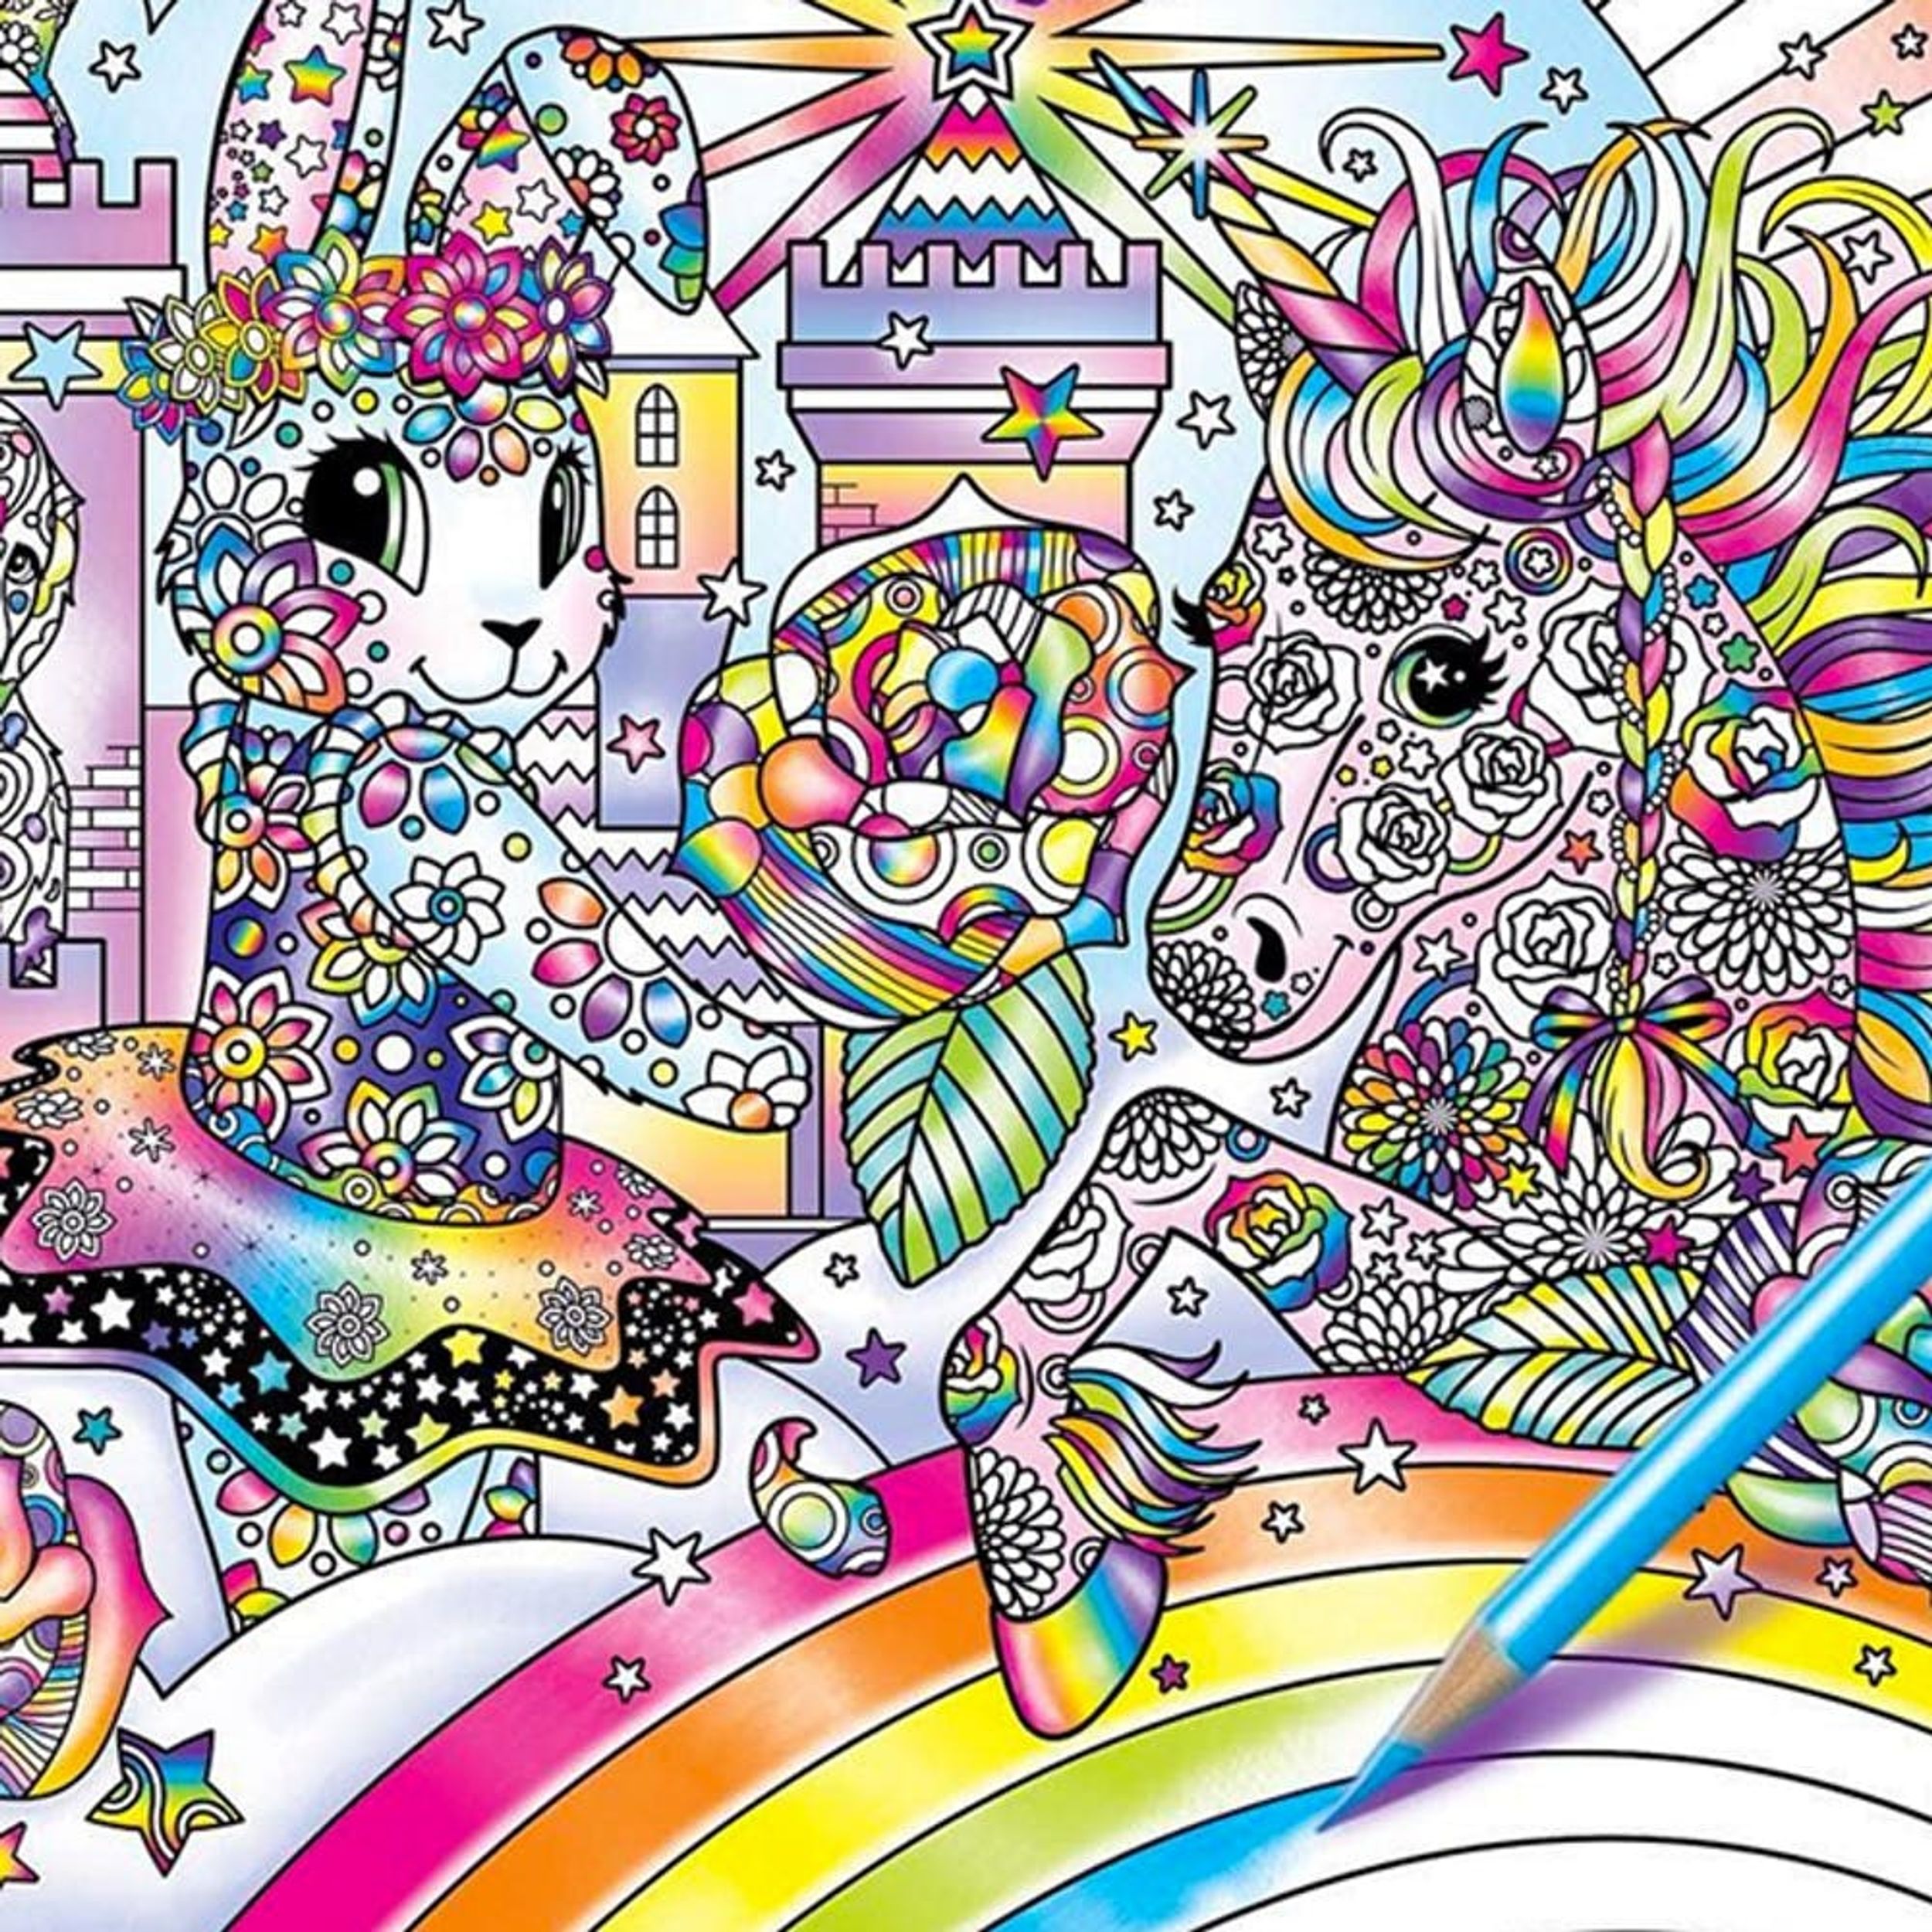 Prepare Your ’90s-Loving Hearts: A Lisa Frank Adult Coloring Book Is Happening